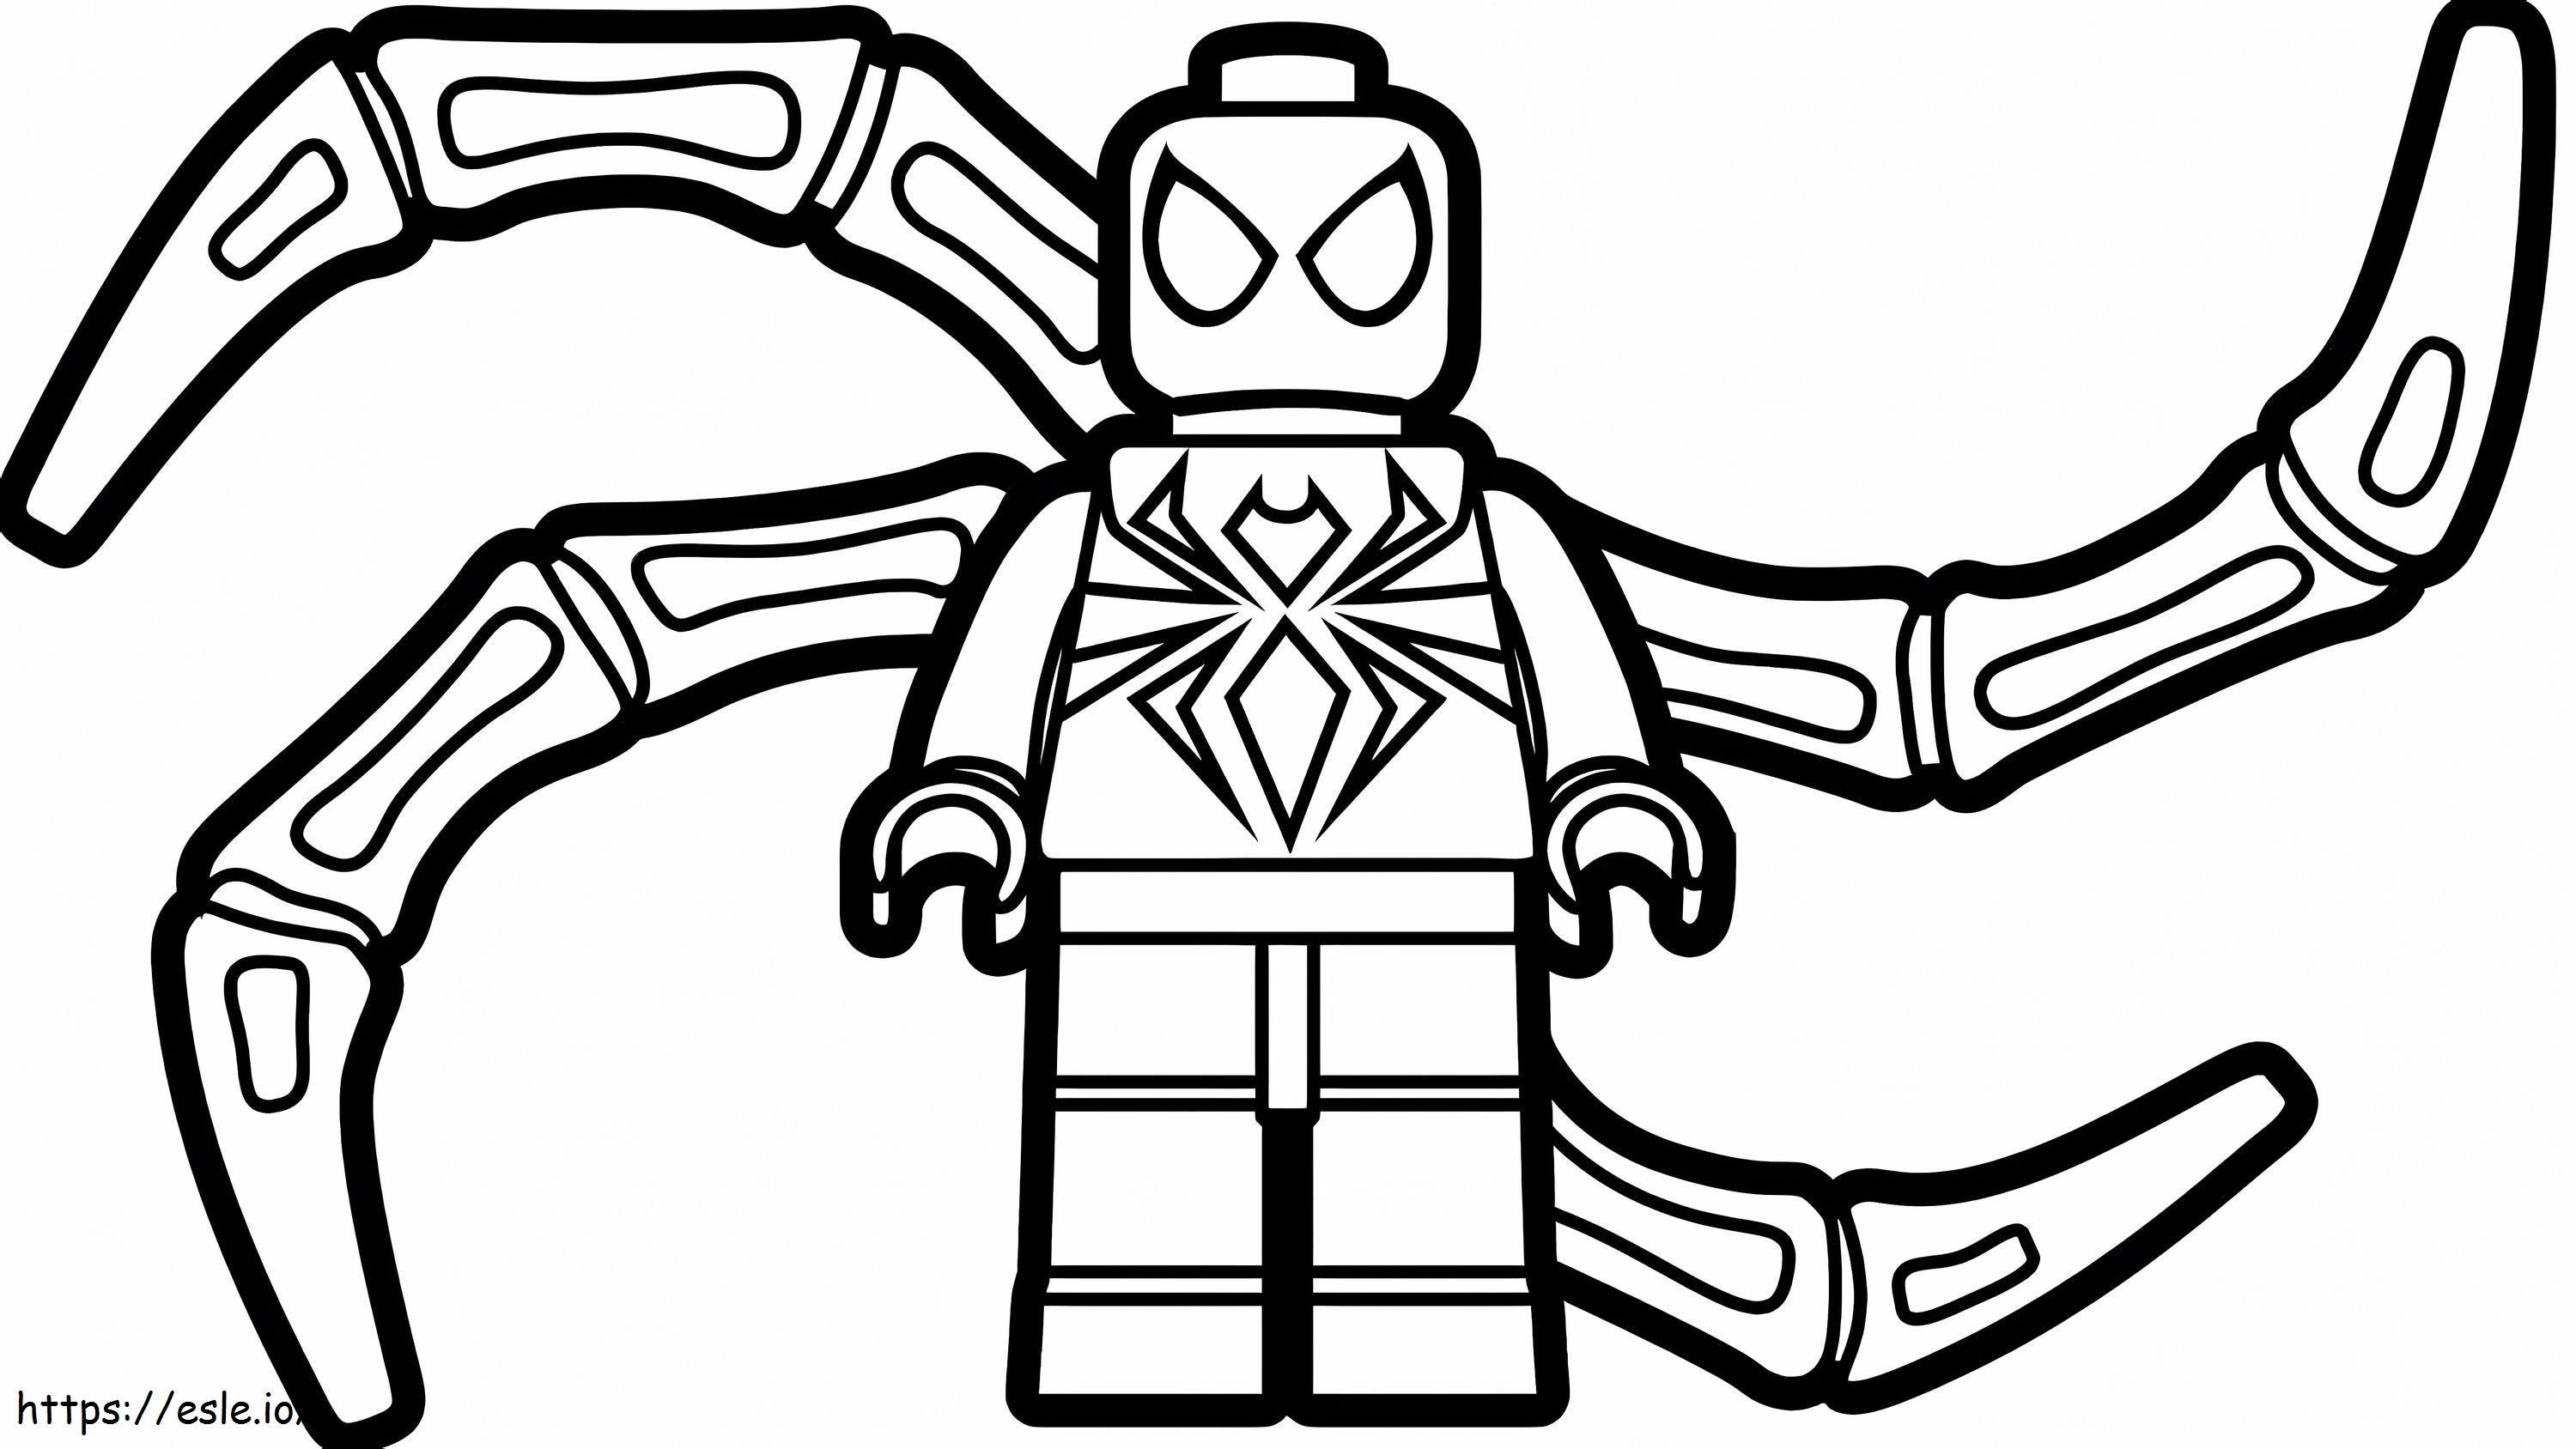 Lego Iron Spiderman coloring page